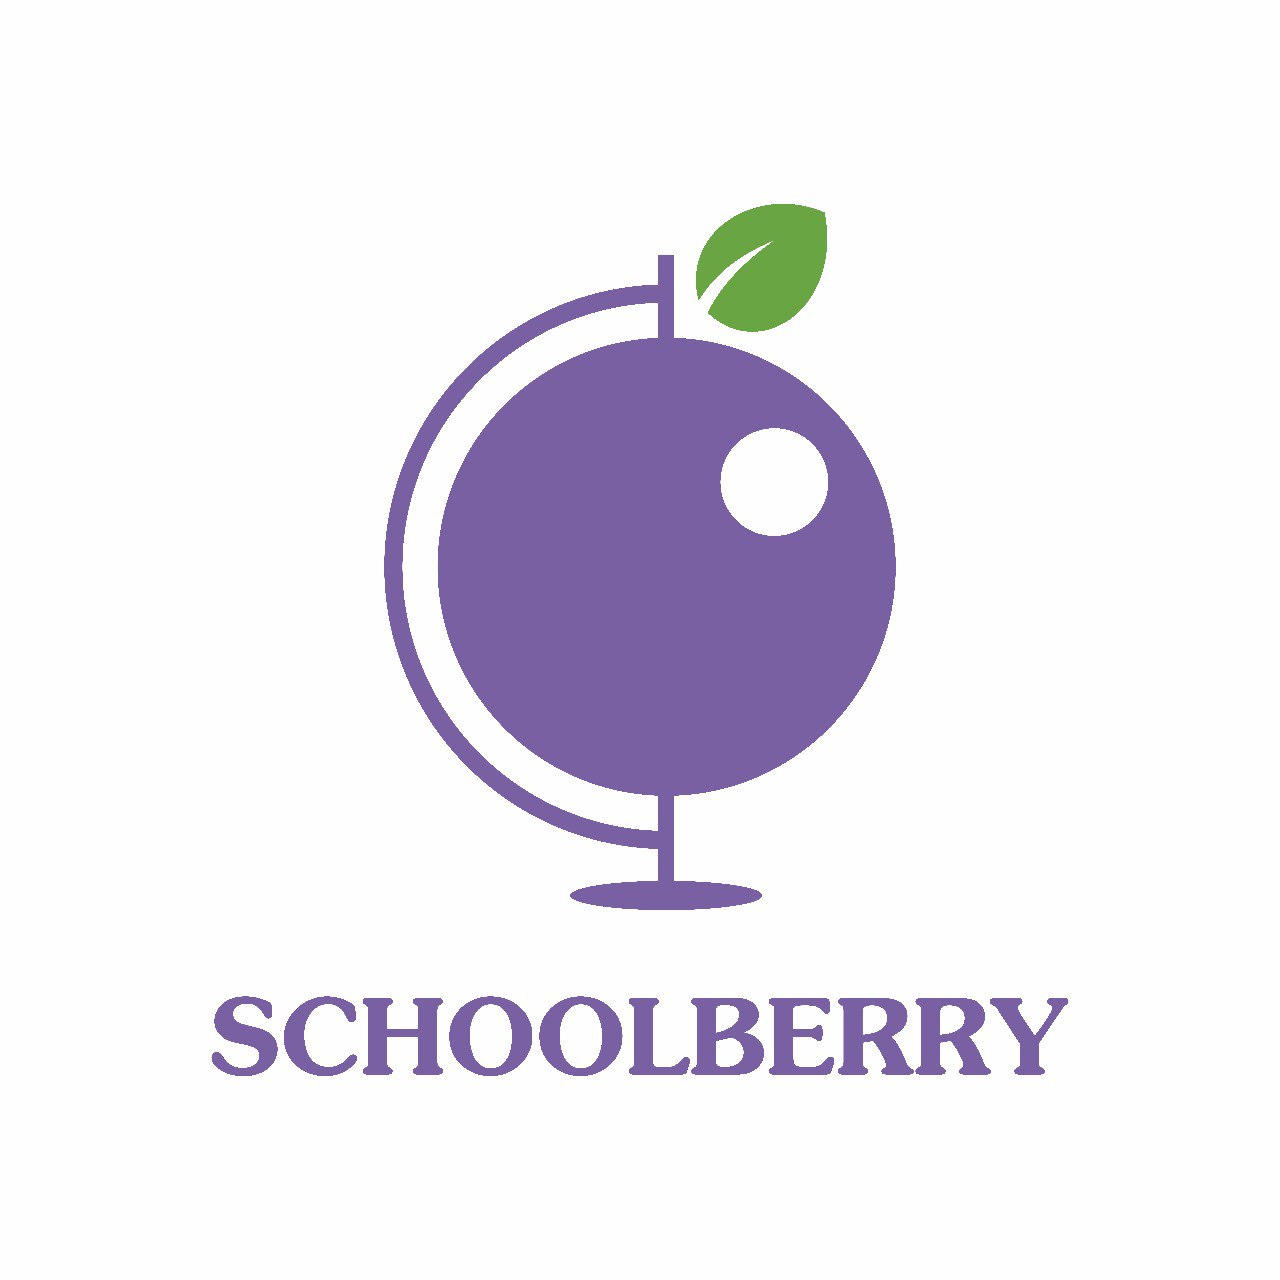 SCHOLBERRY